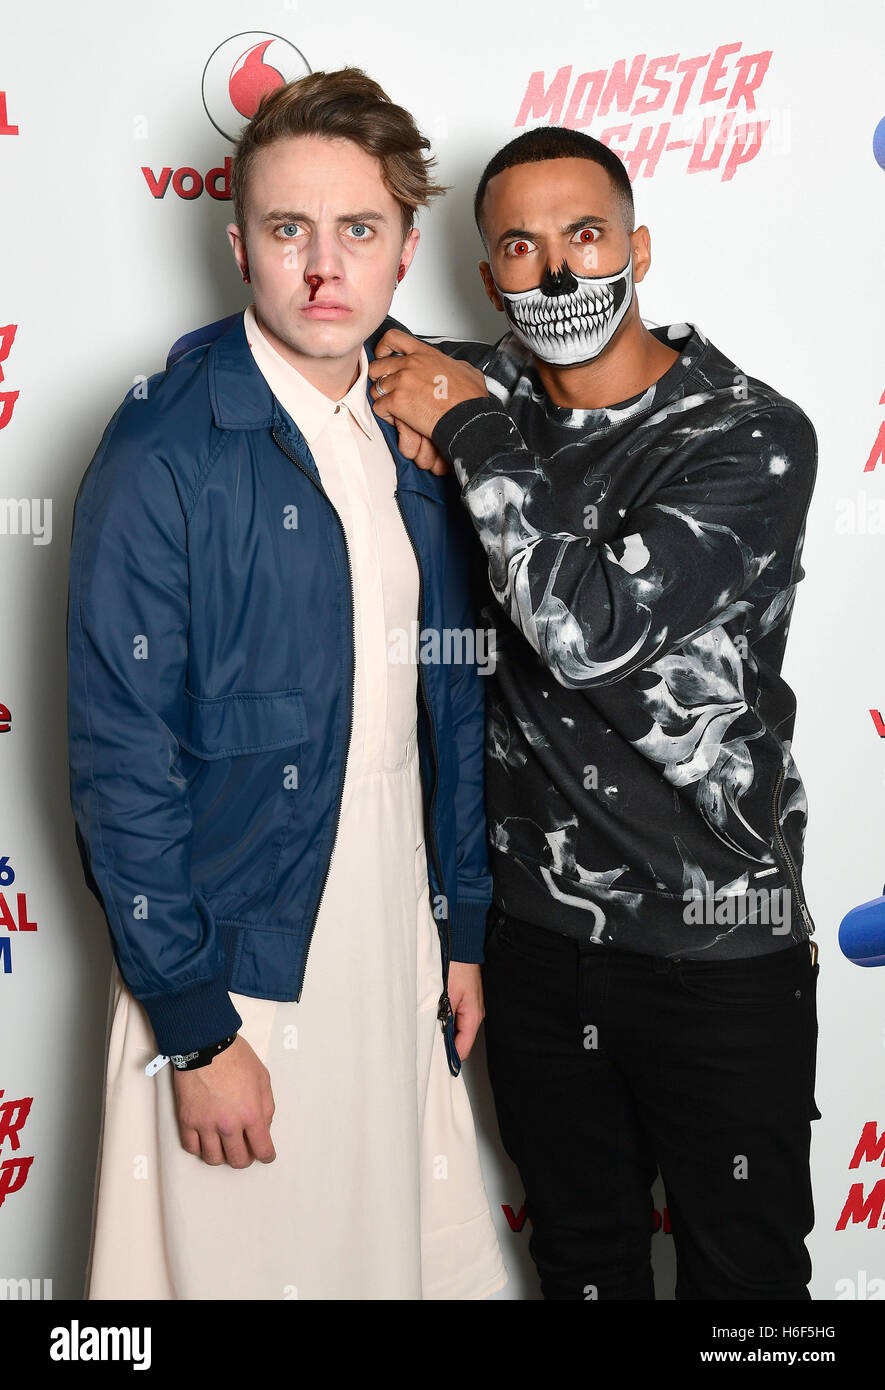 Capital FM's Roman Kemp (left), dressed as Eleven from Stranger Things, and Marvin Humes attending Capital's Monster Mash-Up with Vodafone at the Eventim Apollo in London. Stock Photo